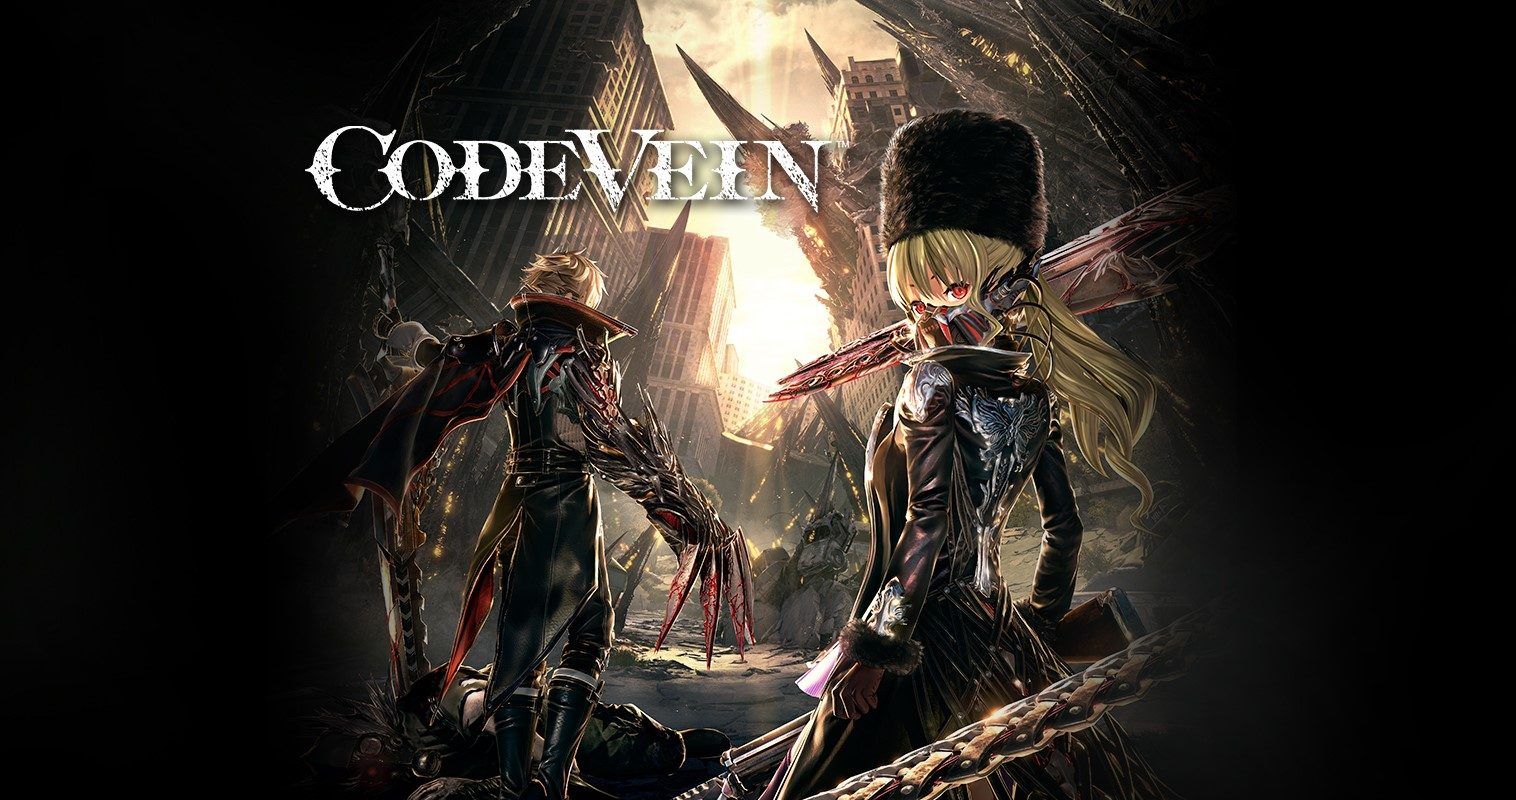 Discoverings: code vein how to get good ending - A Comprehensive Guide